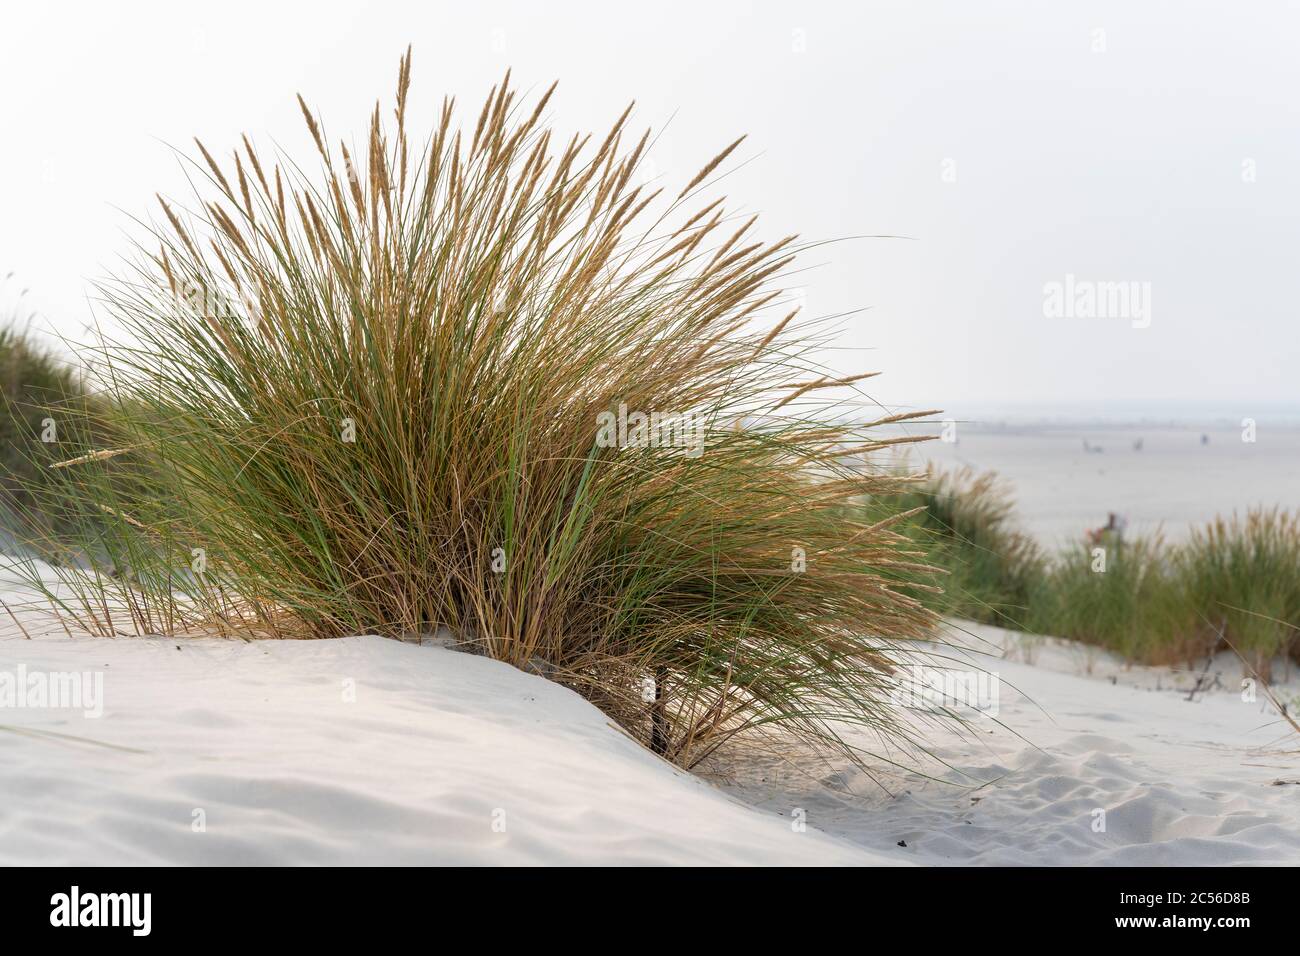 Germany, Lower Saxony, East Frisia, Juist, beach grass (Ammophila) genus of plants from the sweet grass family (Poaceae). Stock Photo